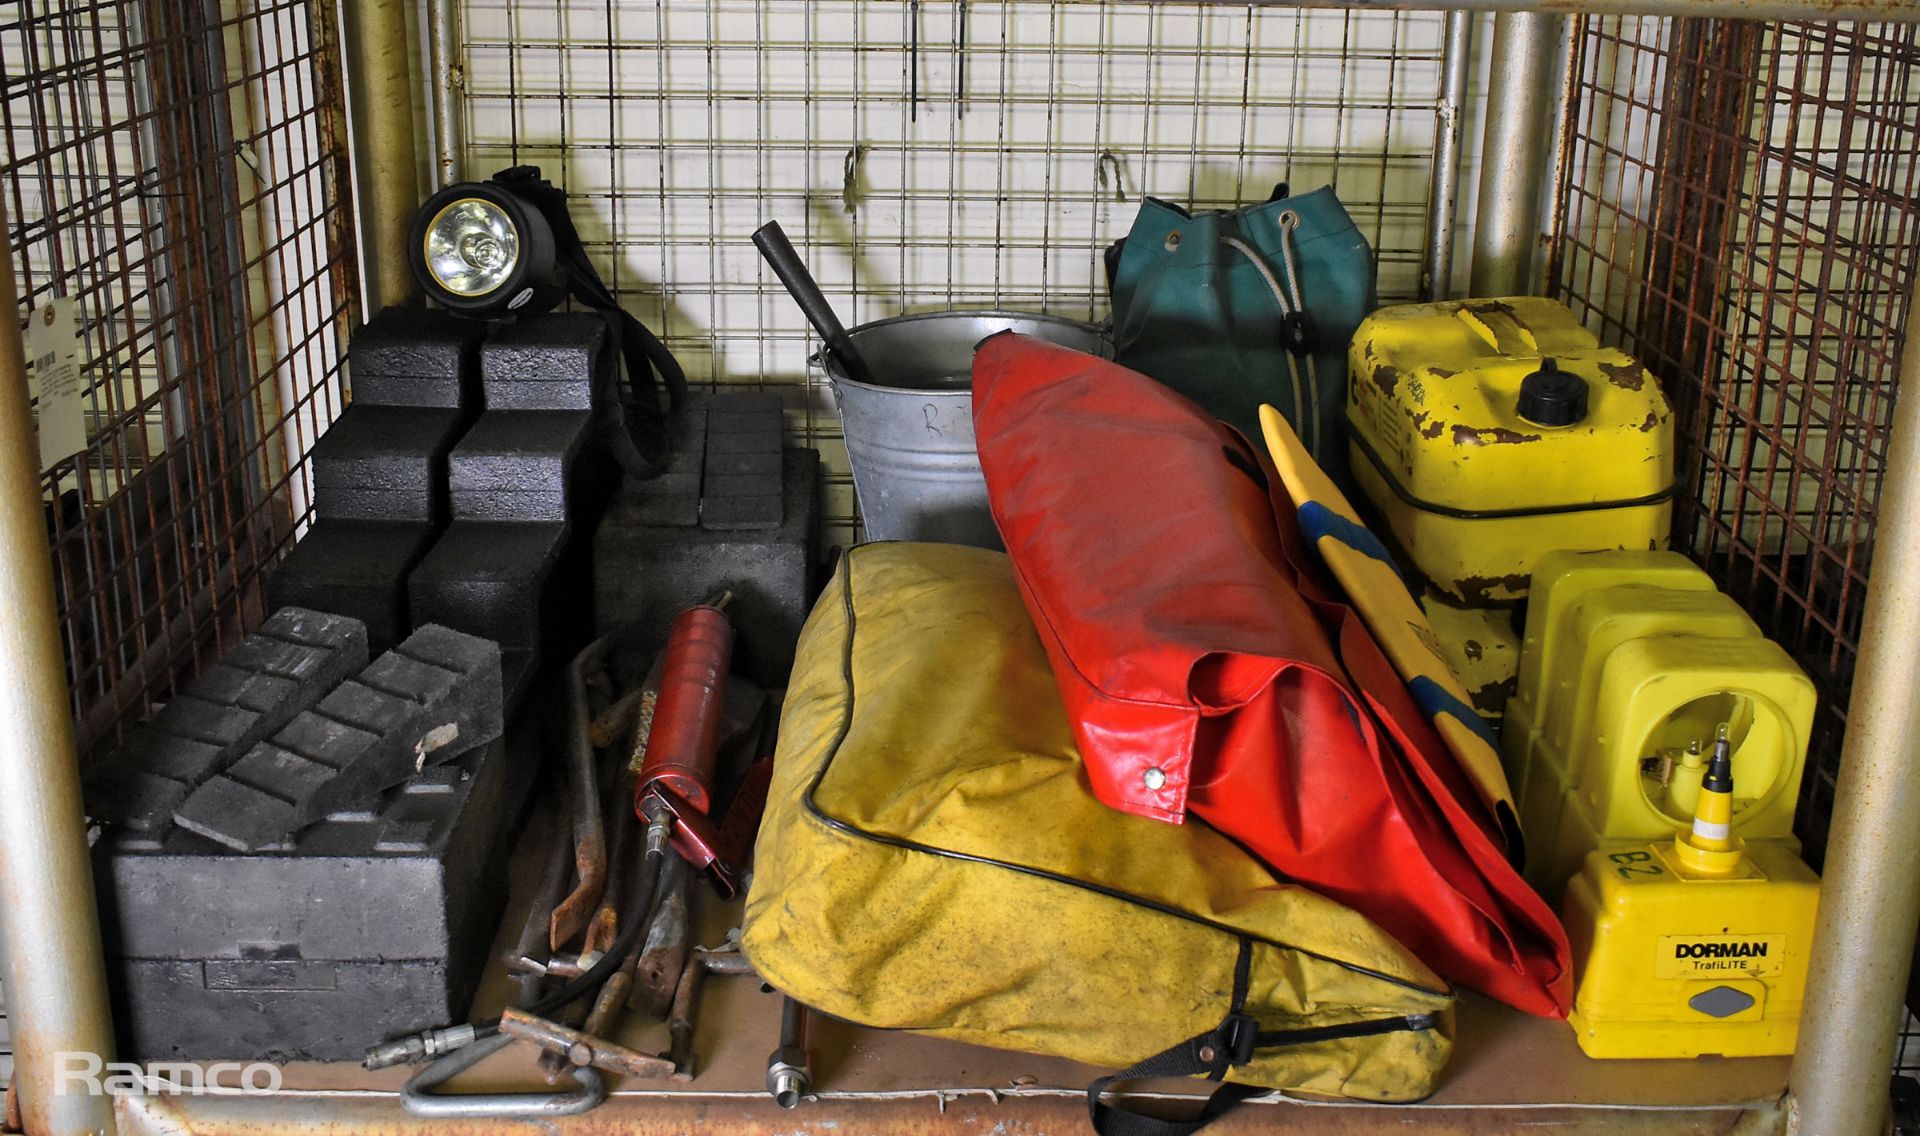 Fire and rescue accessories - hand tools, RTC chocks & blocks, ropes, lights, chemical sorbent pads - Image 2 of 13